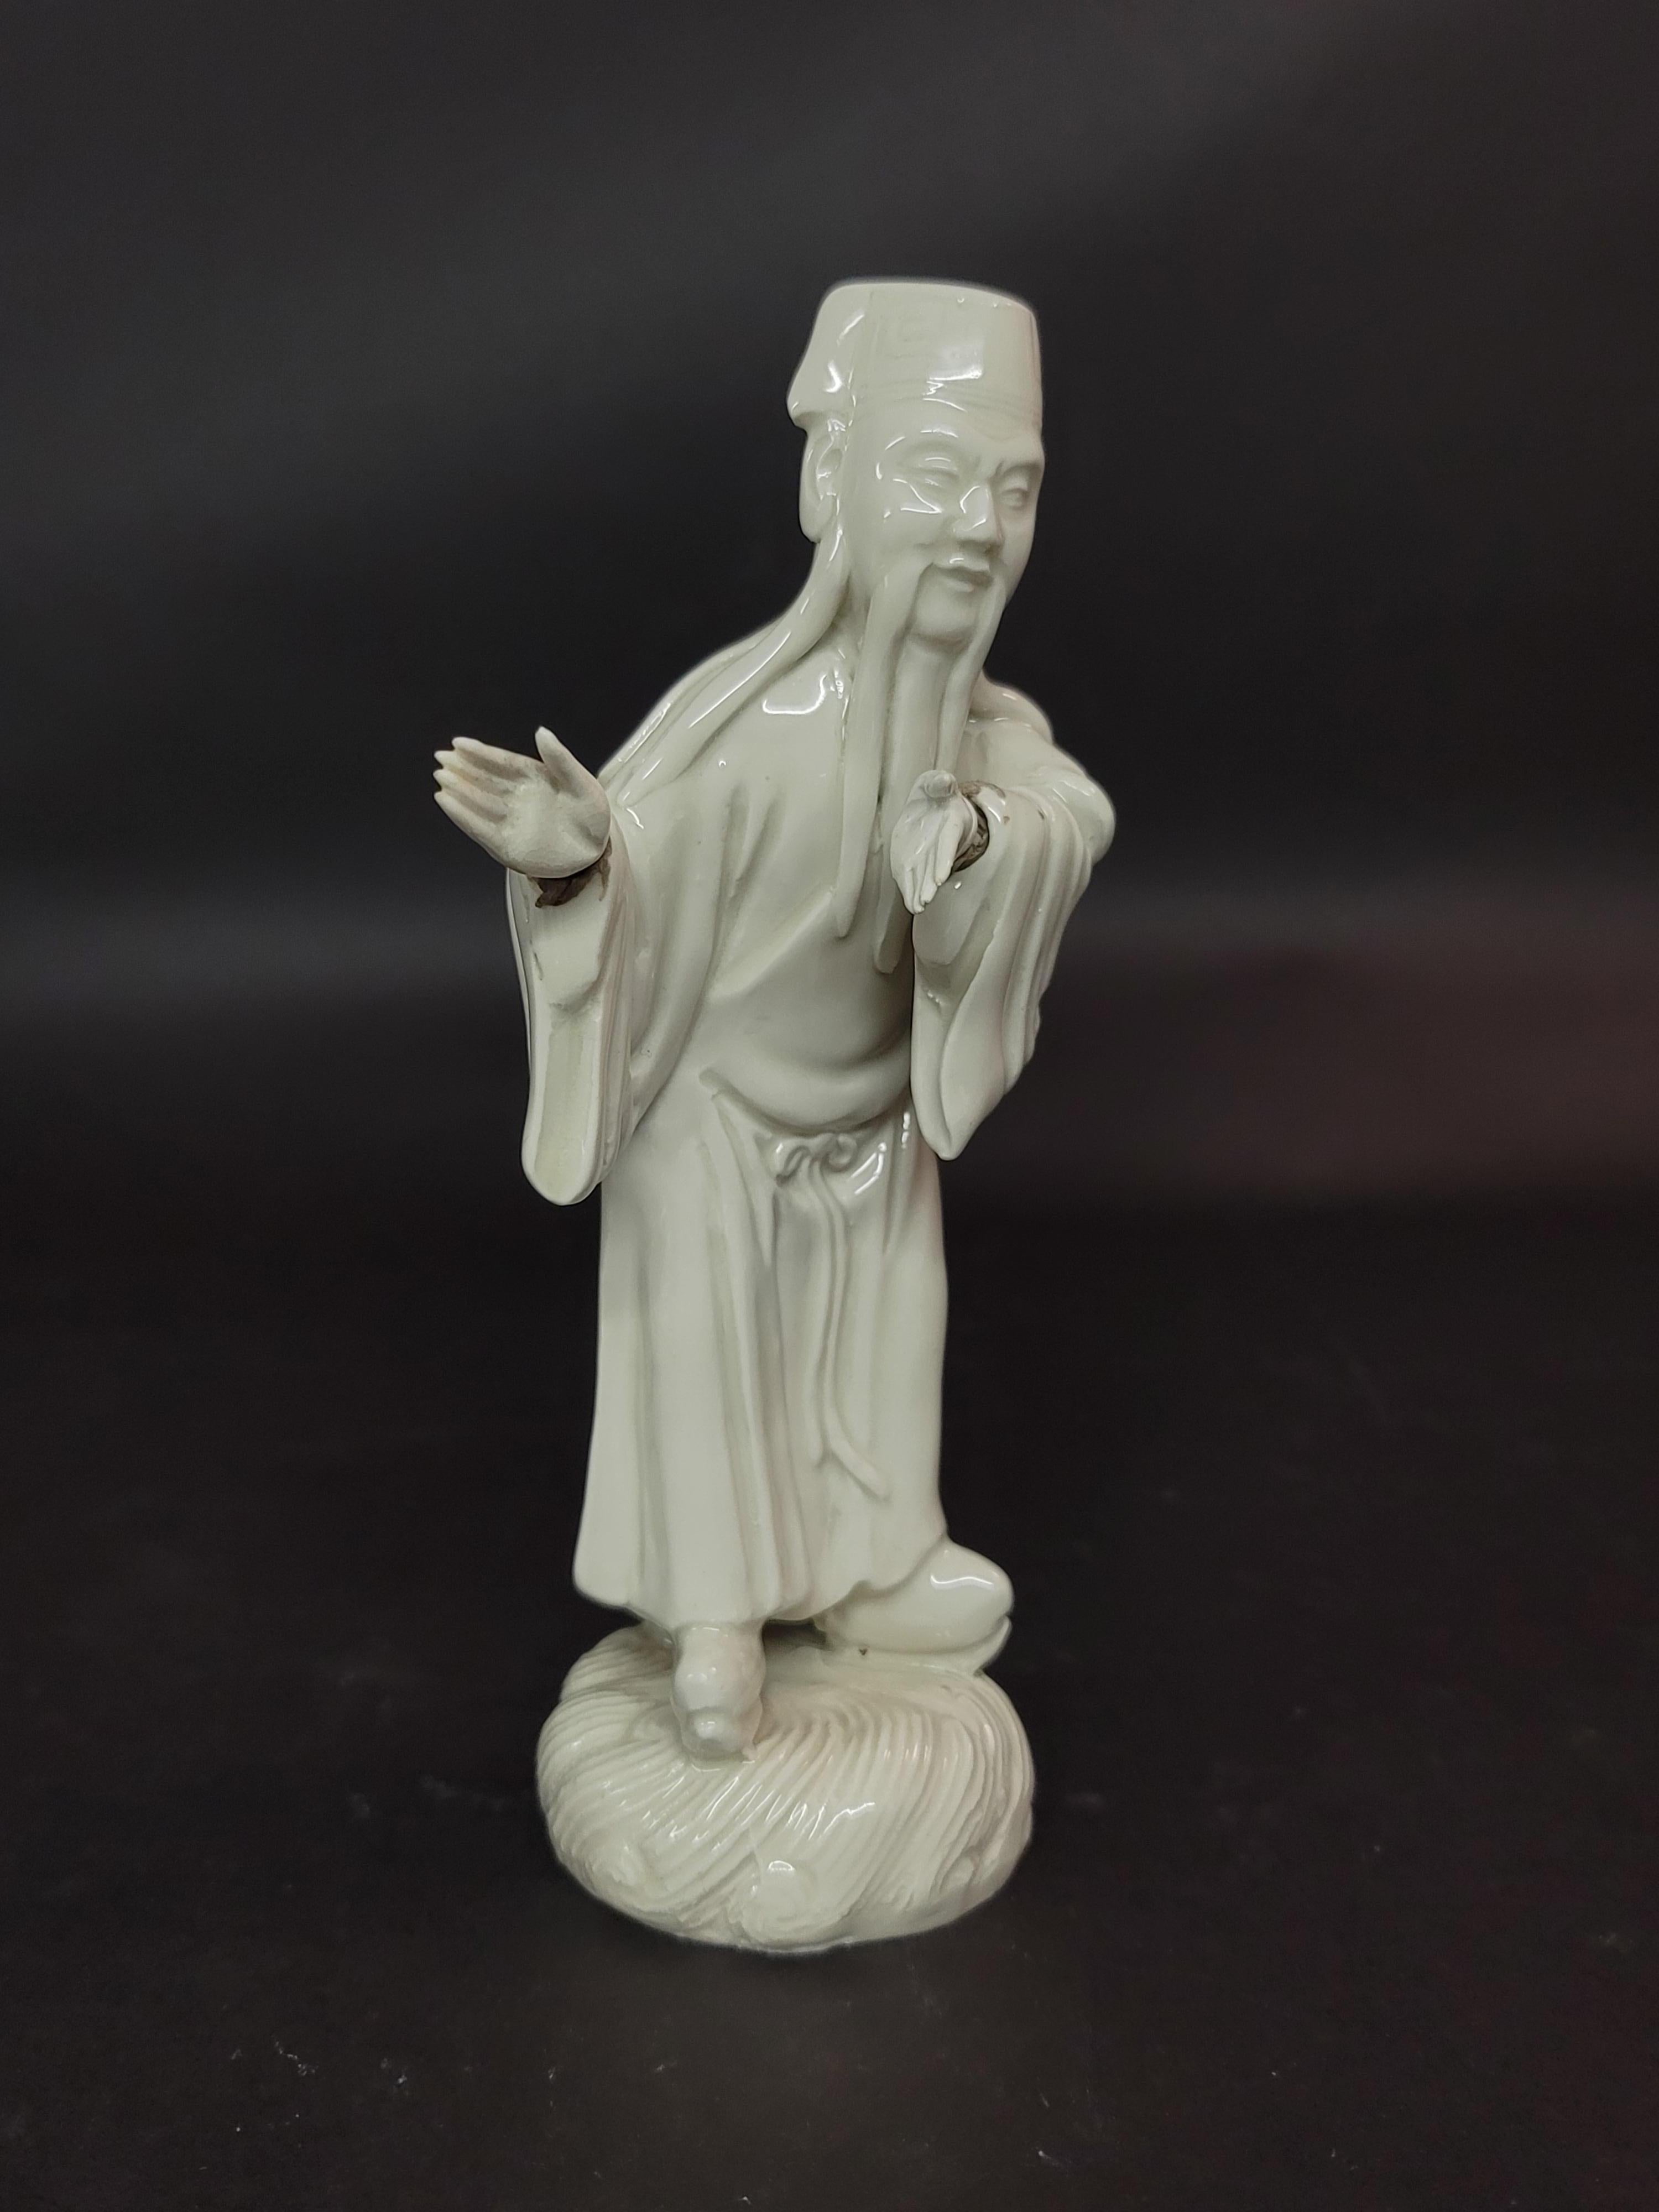 A Blanc de Chine immortal figure from the 19th century, Signed in the bottom.